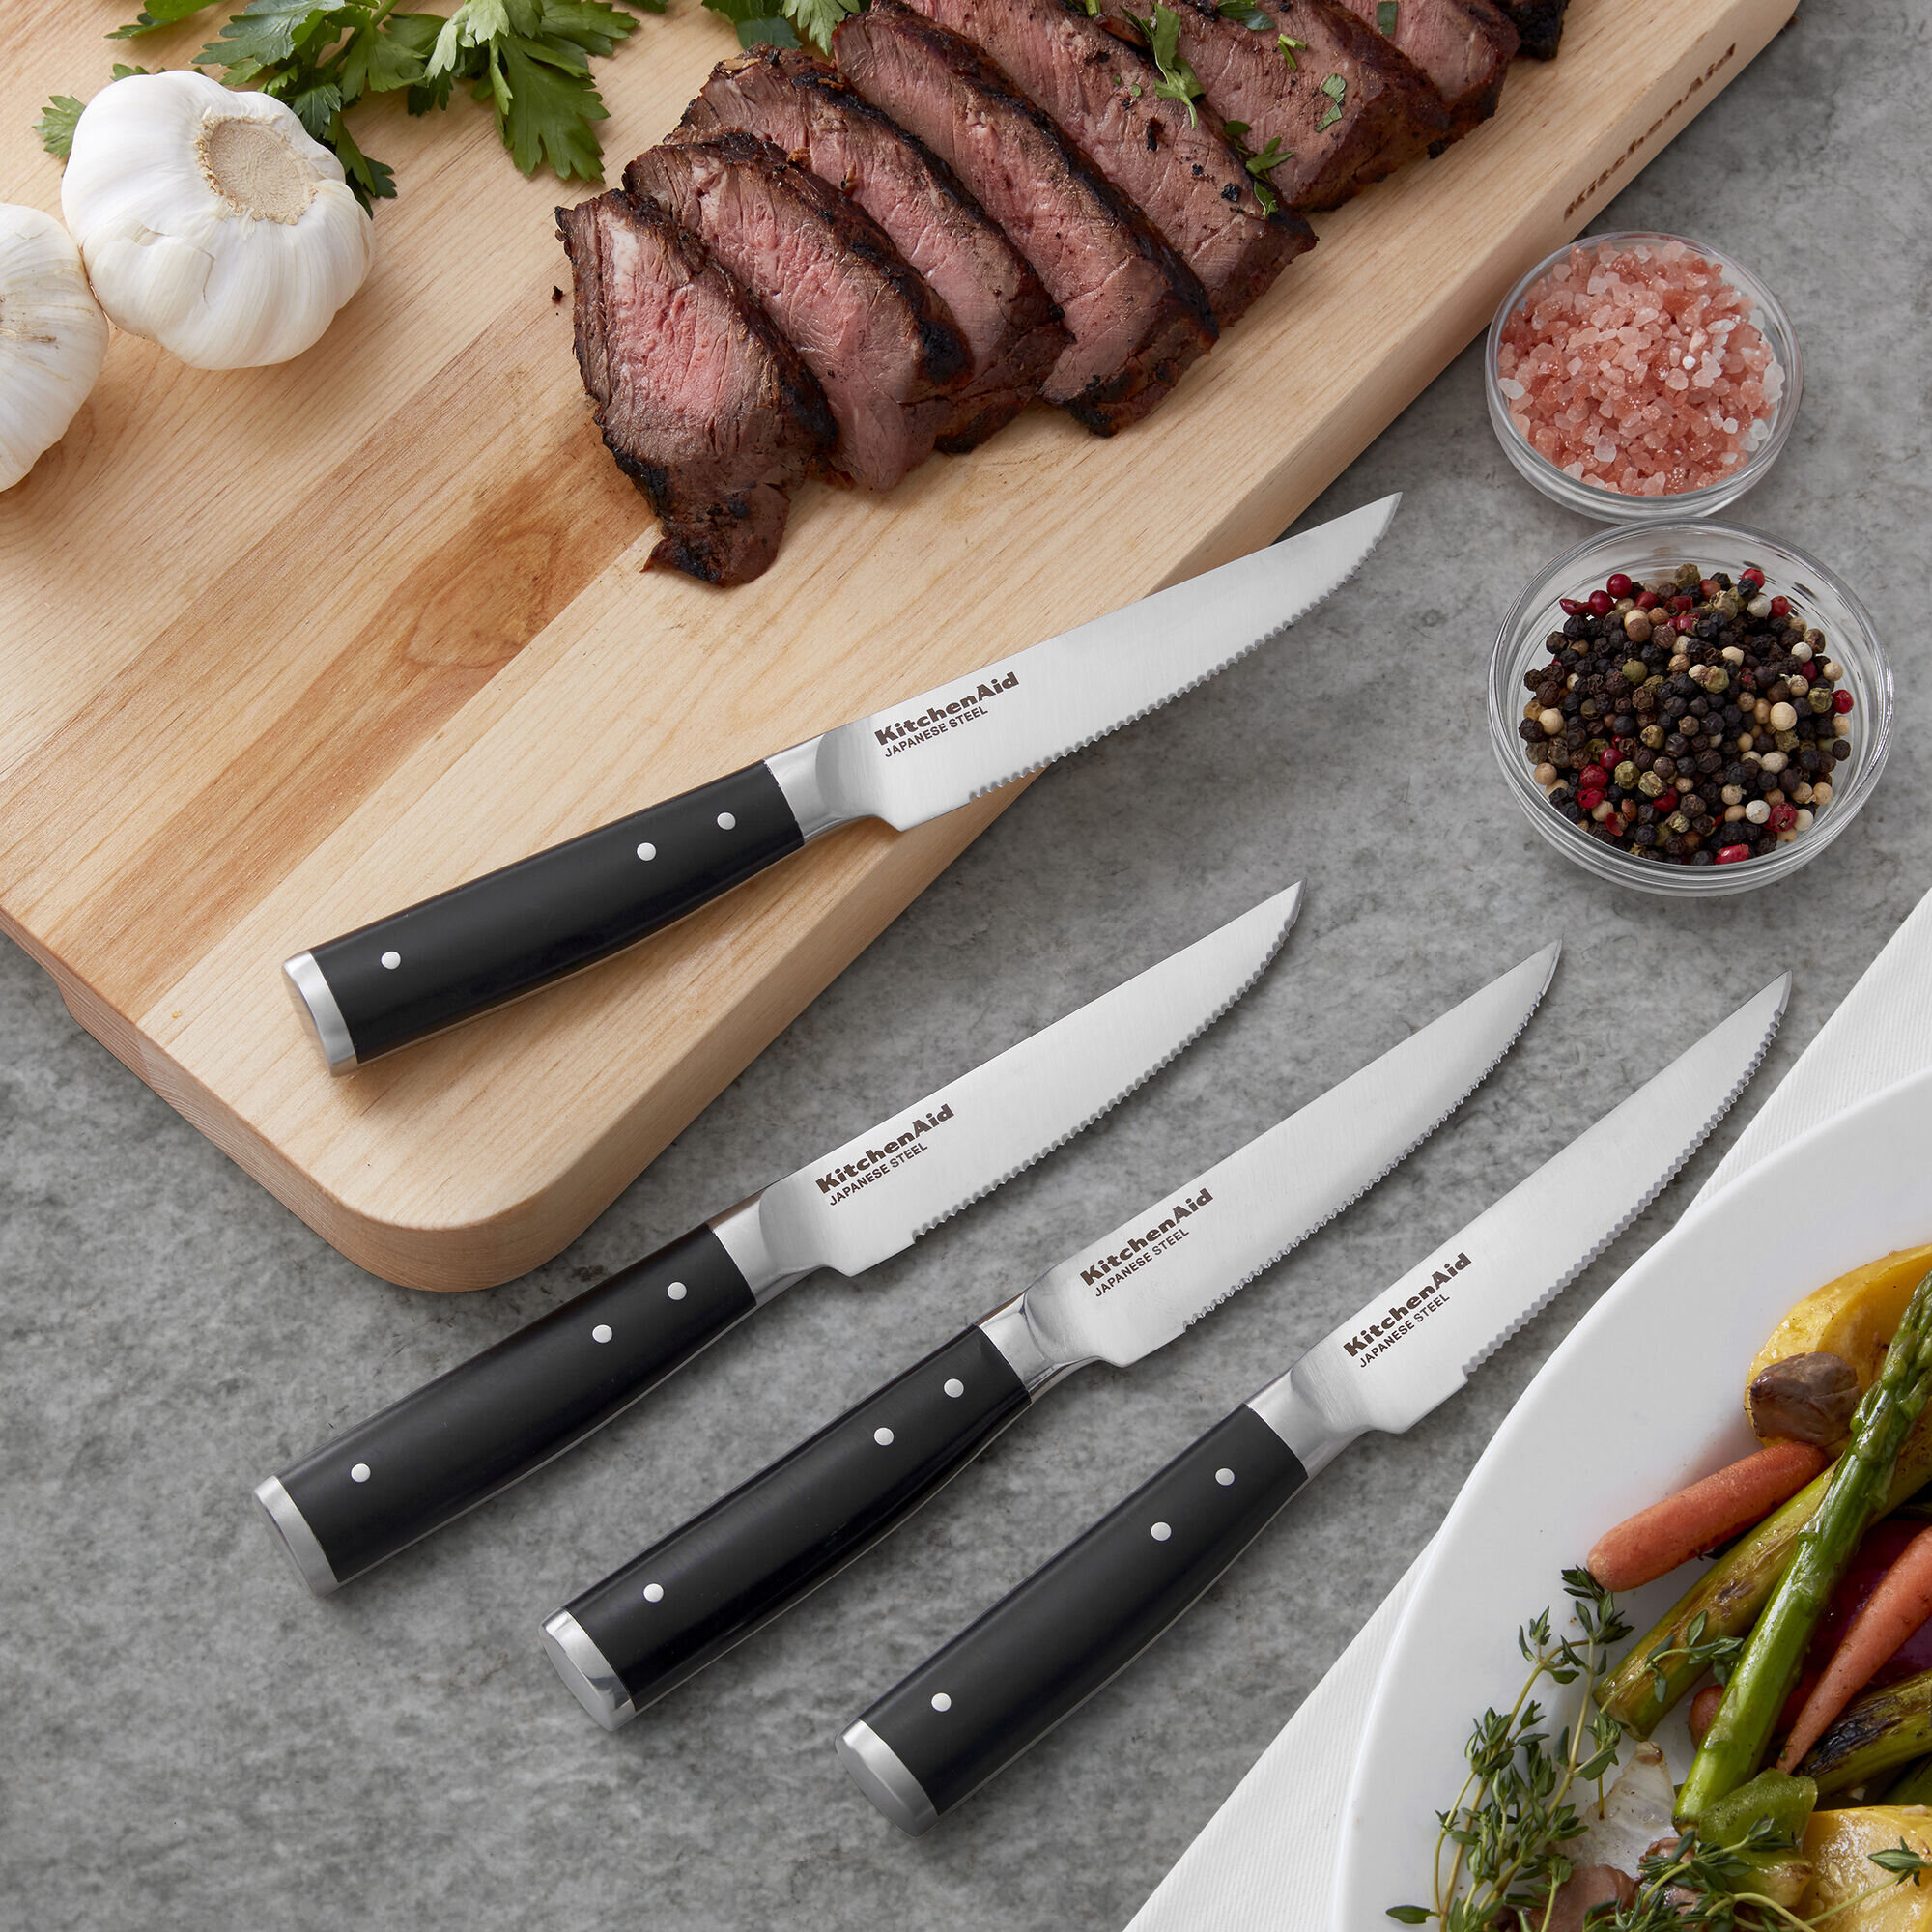 6-Piece Ultimate Steak Knife Set with Full Tang Triple Riveted Handles